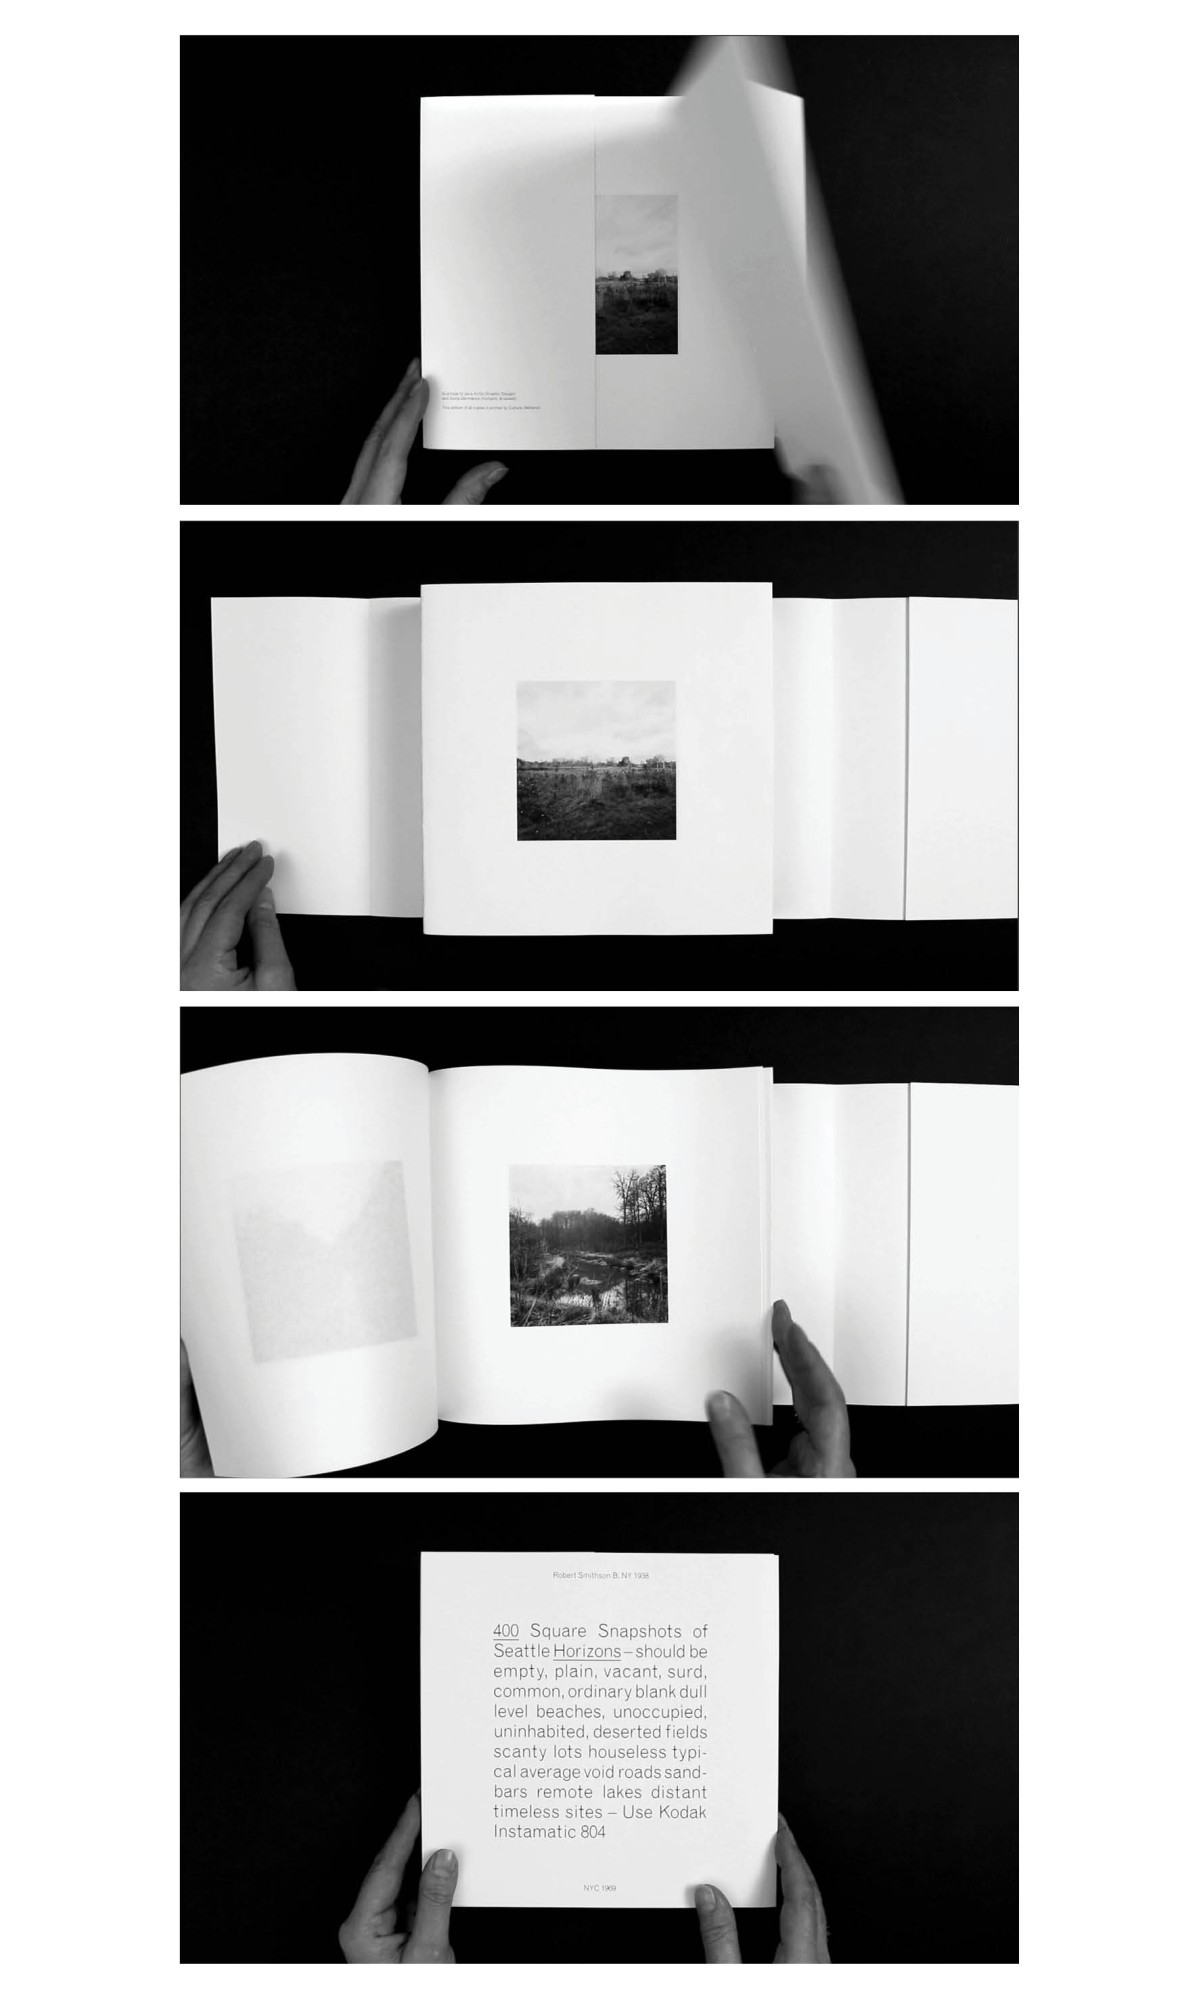 Case Study #2 Robert Smithson, 400 Seattle Horizons (Destroyed) - An edition of 20 copies 800 pages, 22,3 x 22,3 cm, digital printing